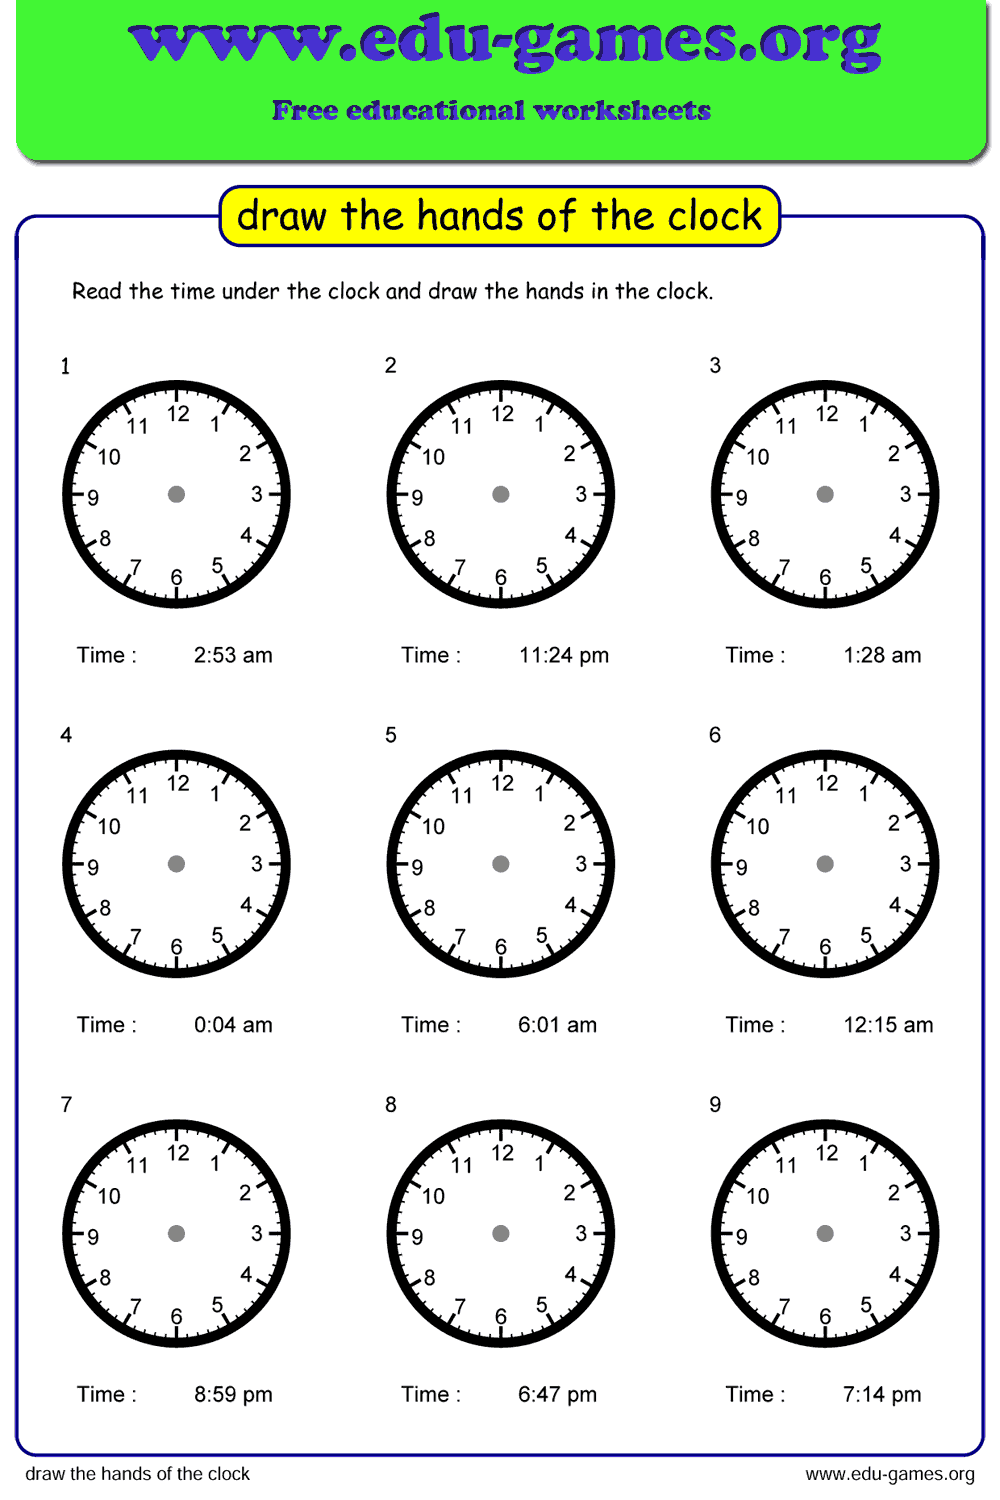 draw the hands of the clock worksheet maker